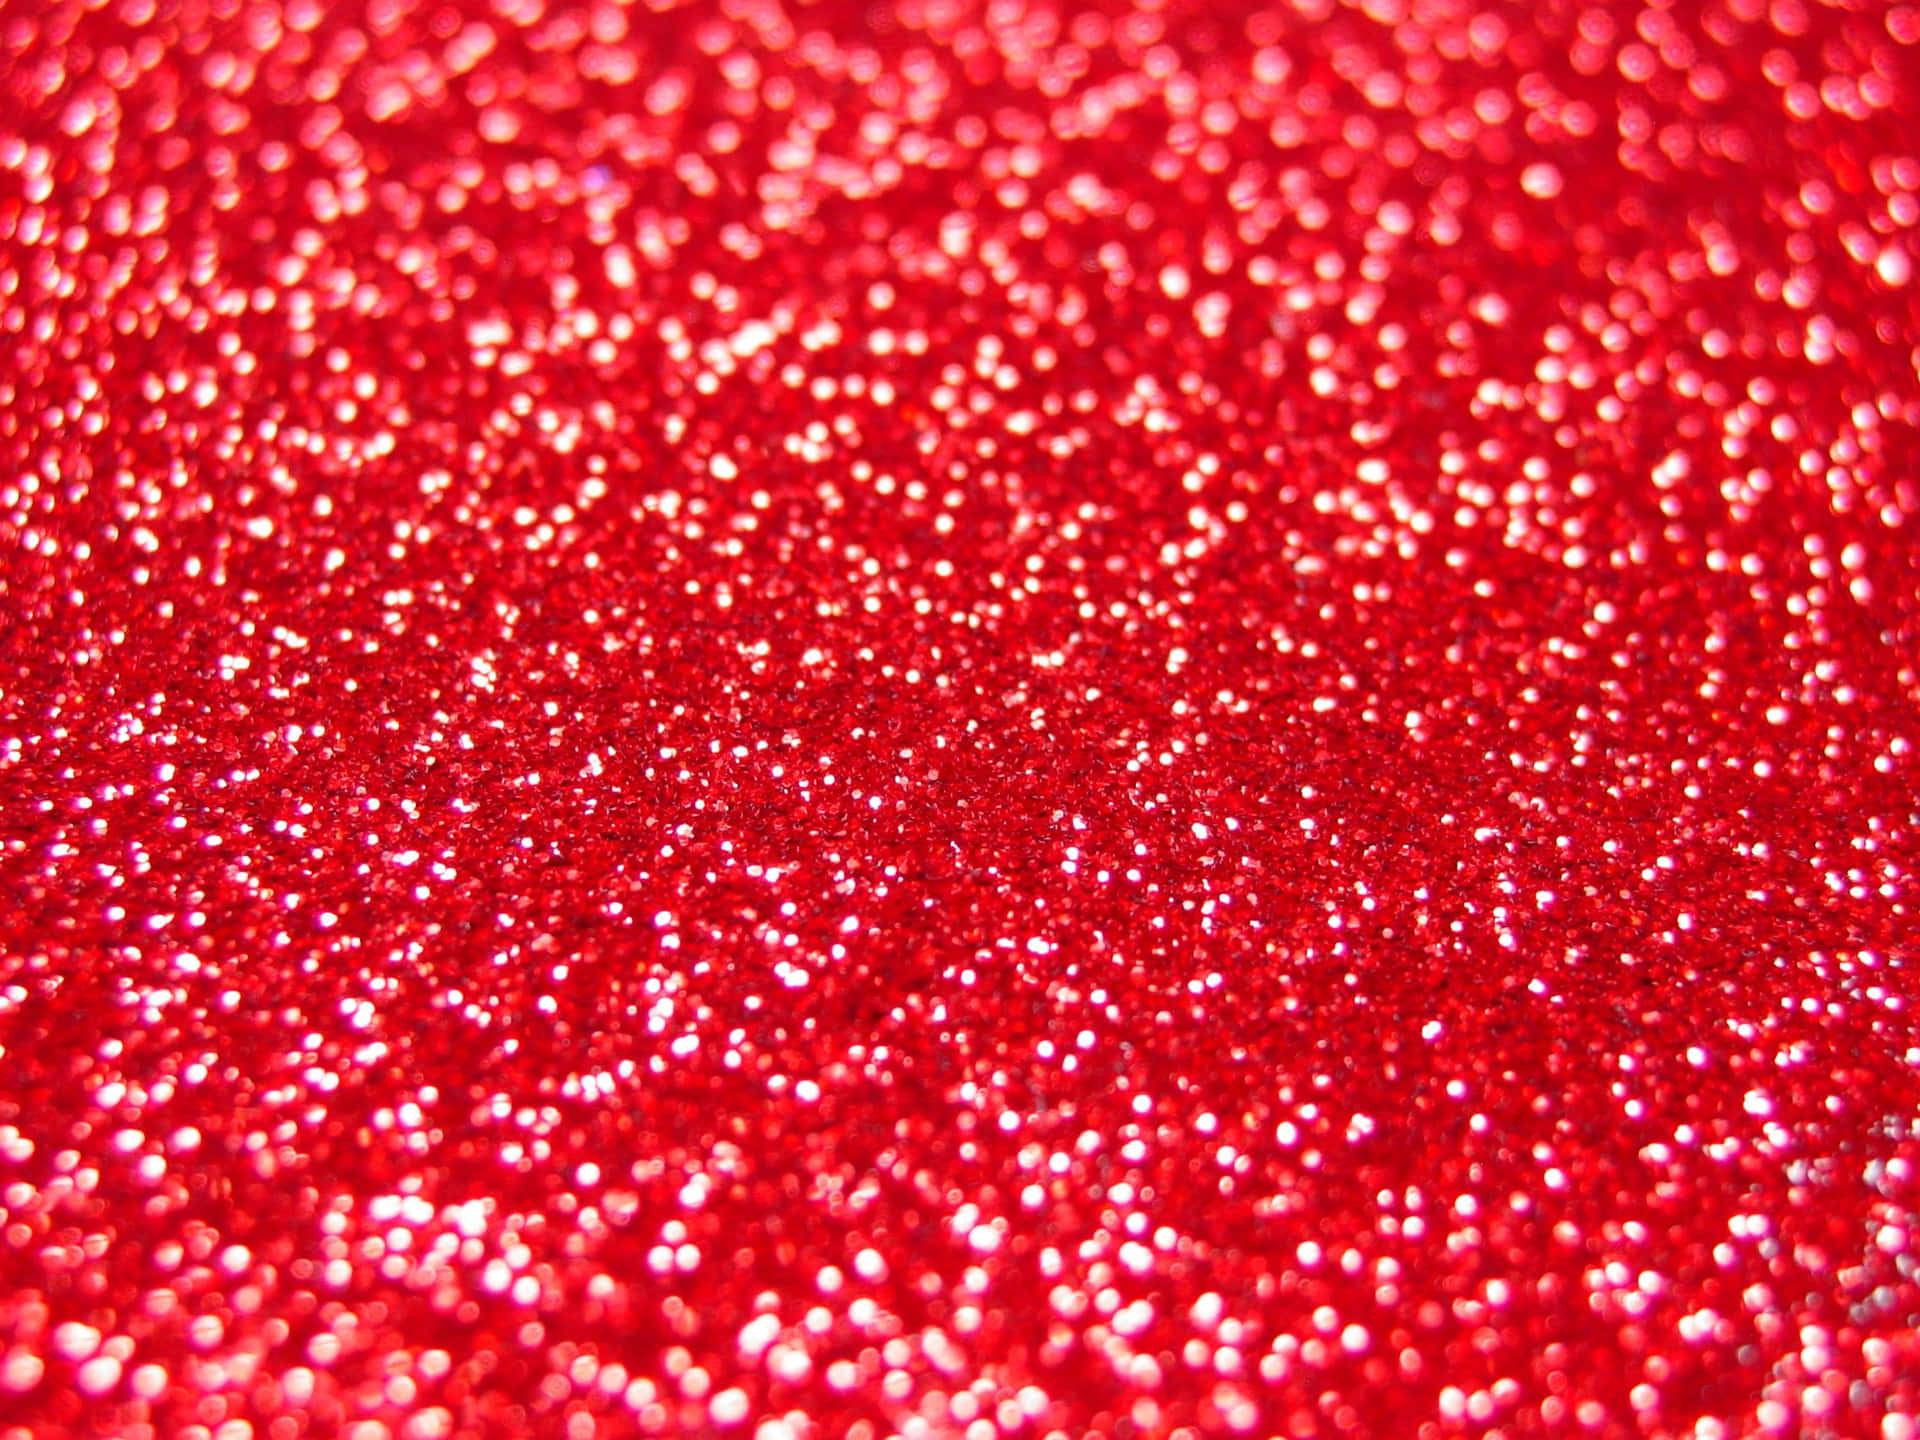 100+] Red Glitter Backgrounds